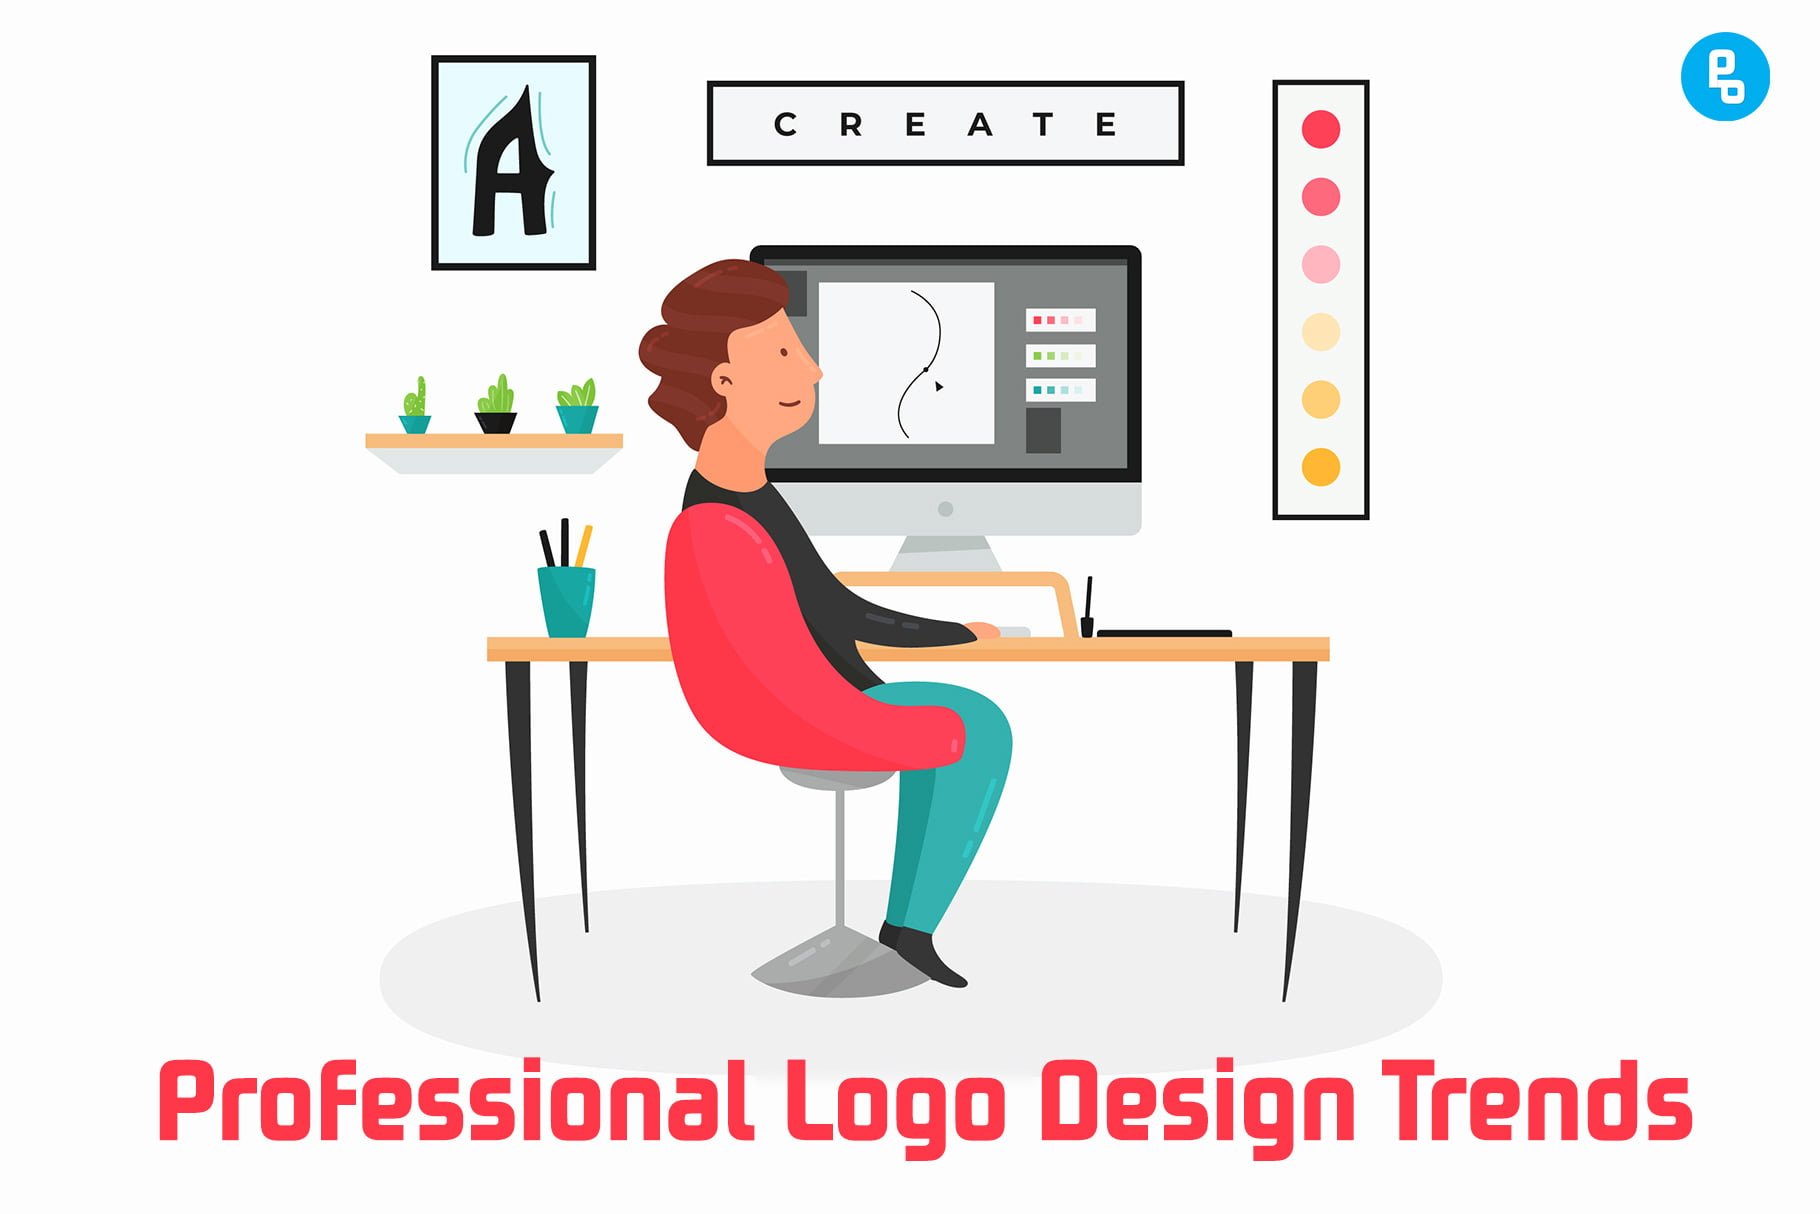 There are always new trends to look out for, and we've put together a list of 10 logo design trends that will be popular in the next five years.